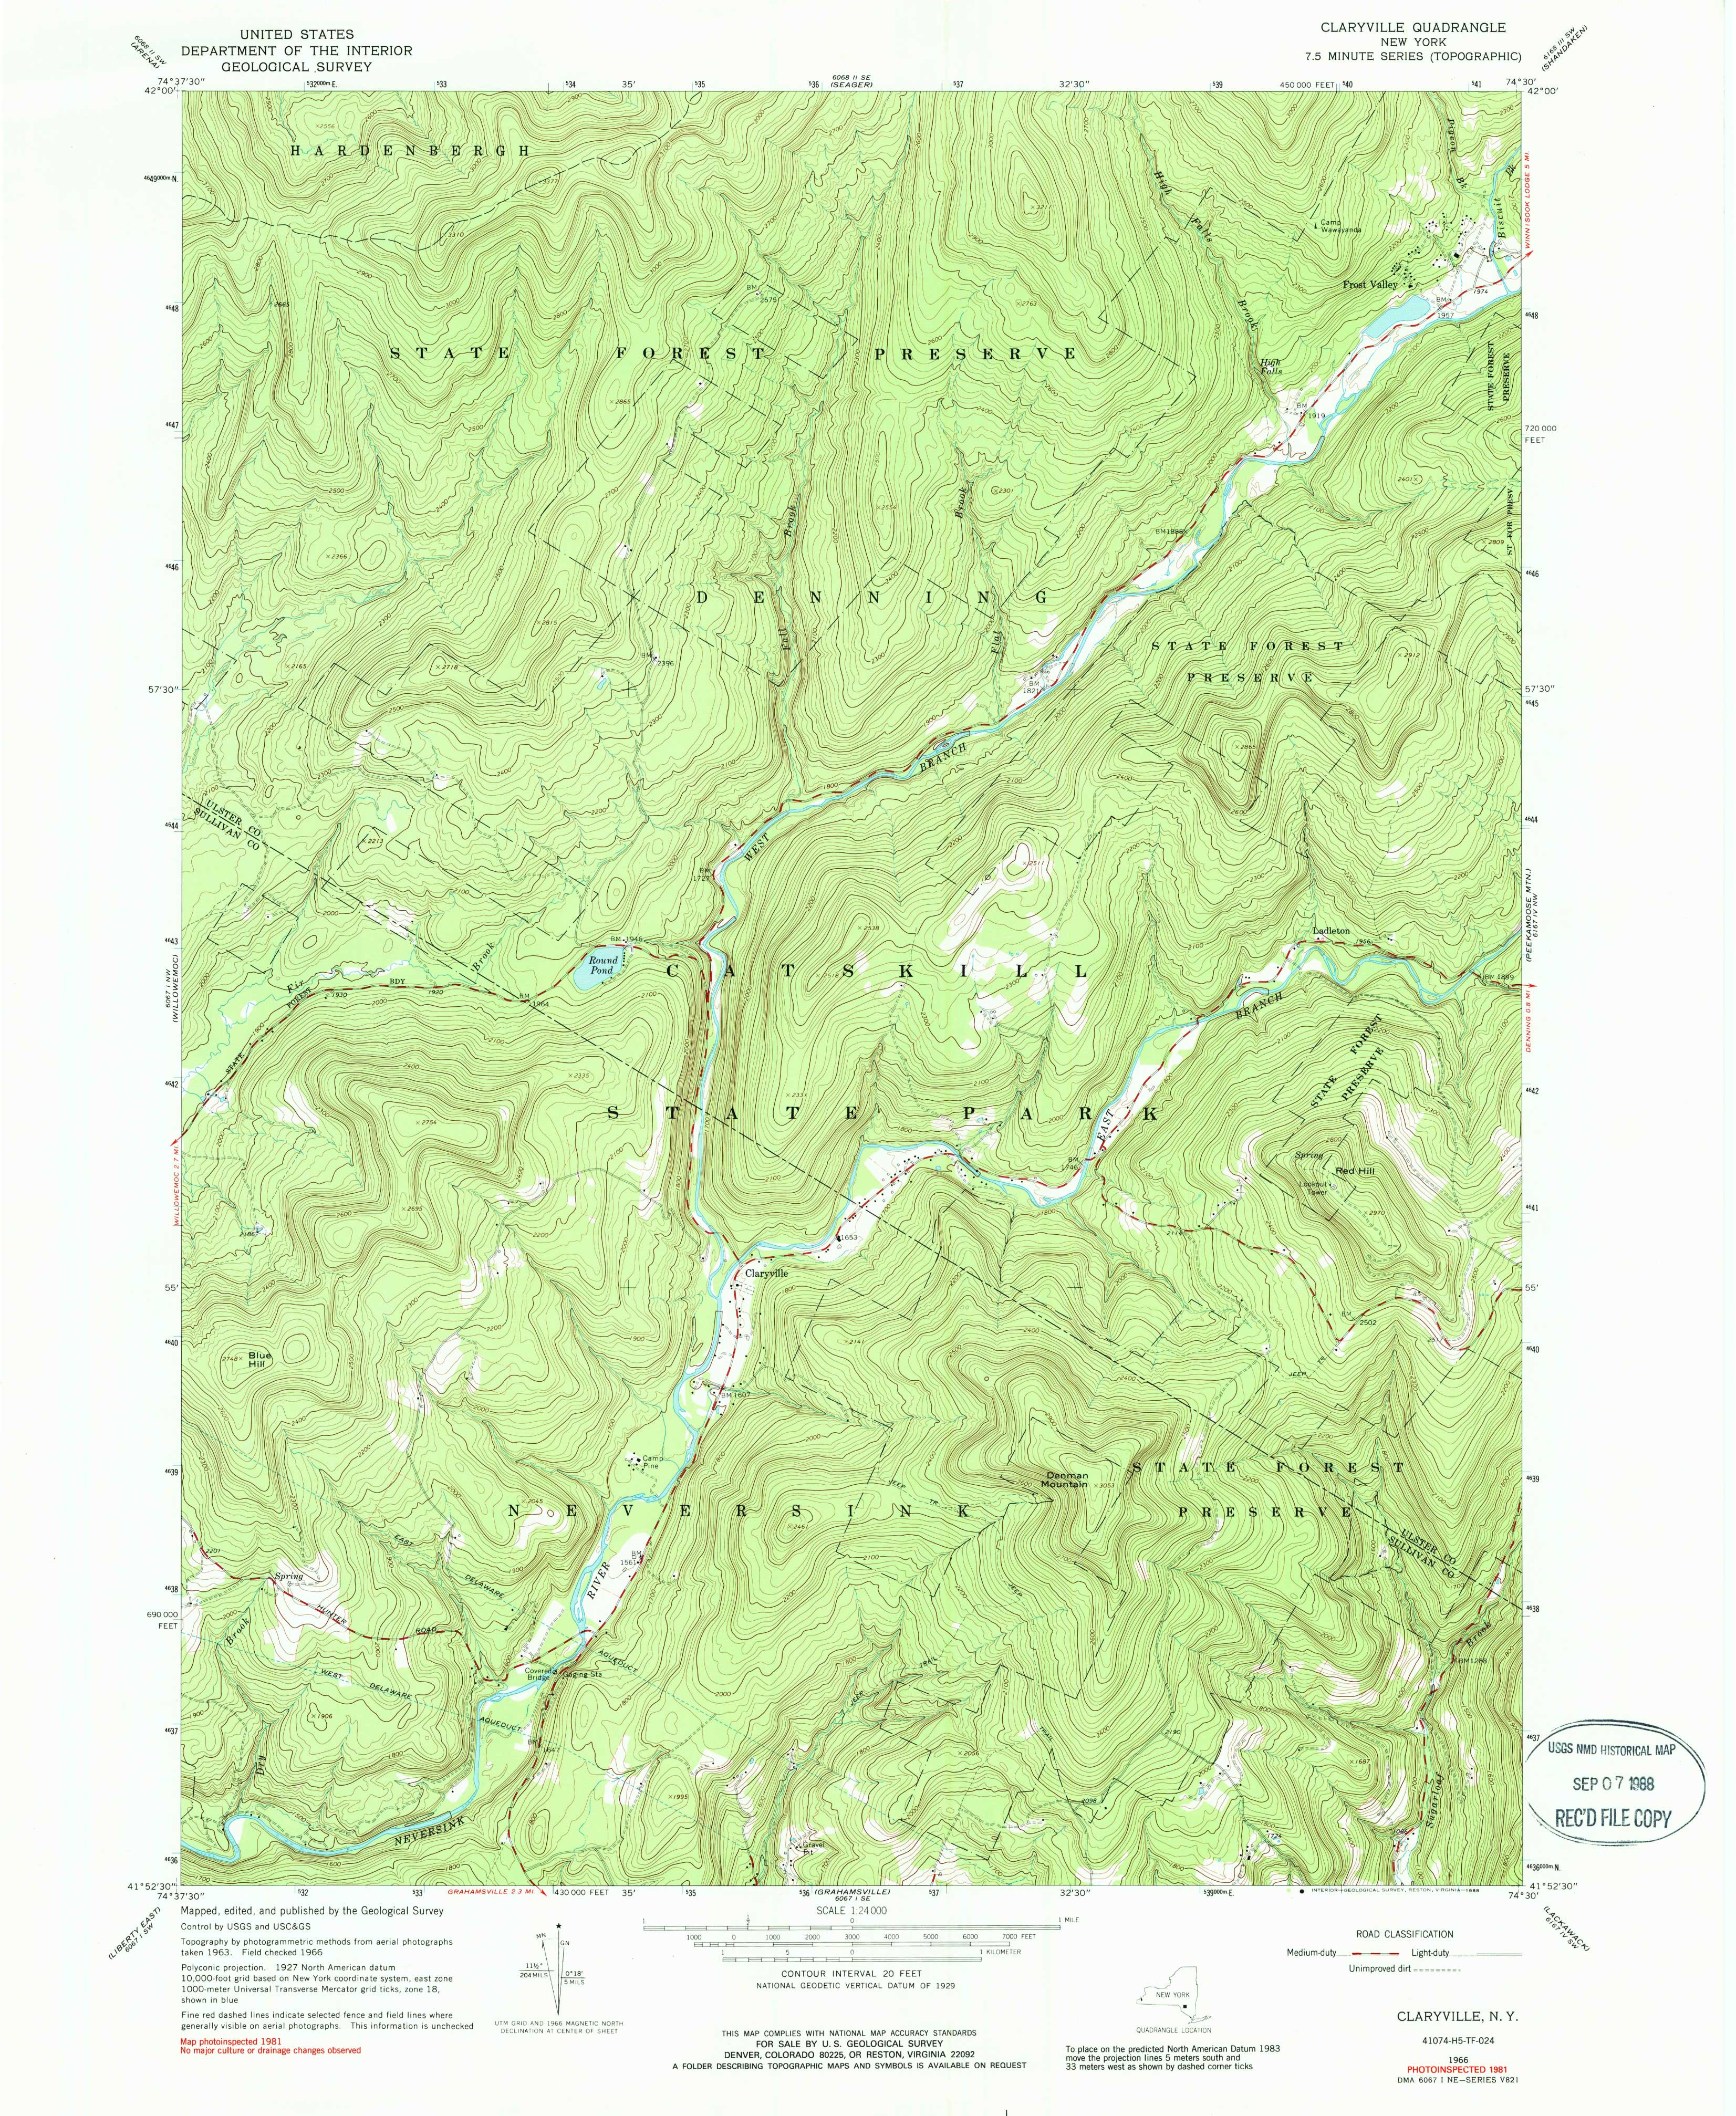 1966 USGS topographical map of Claryville